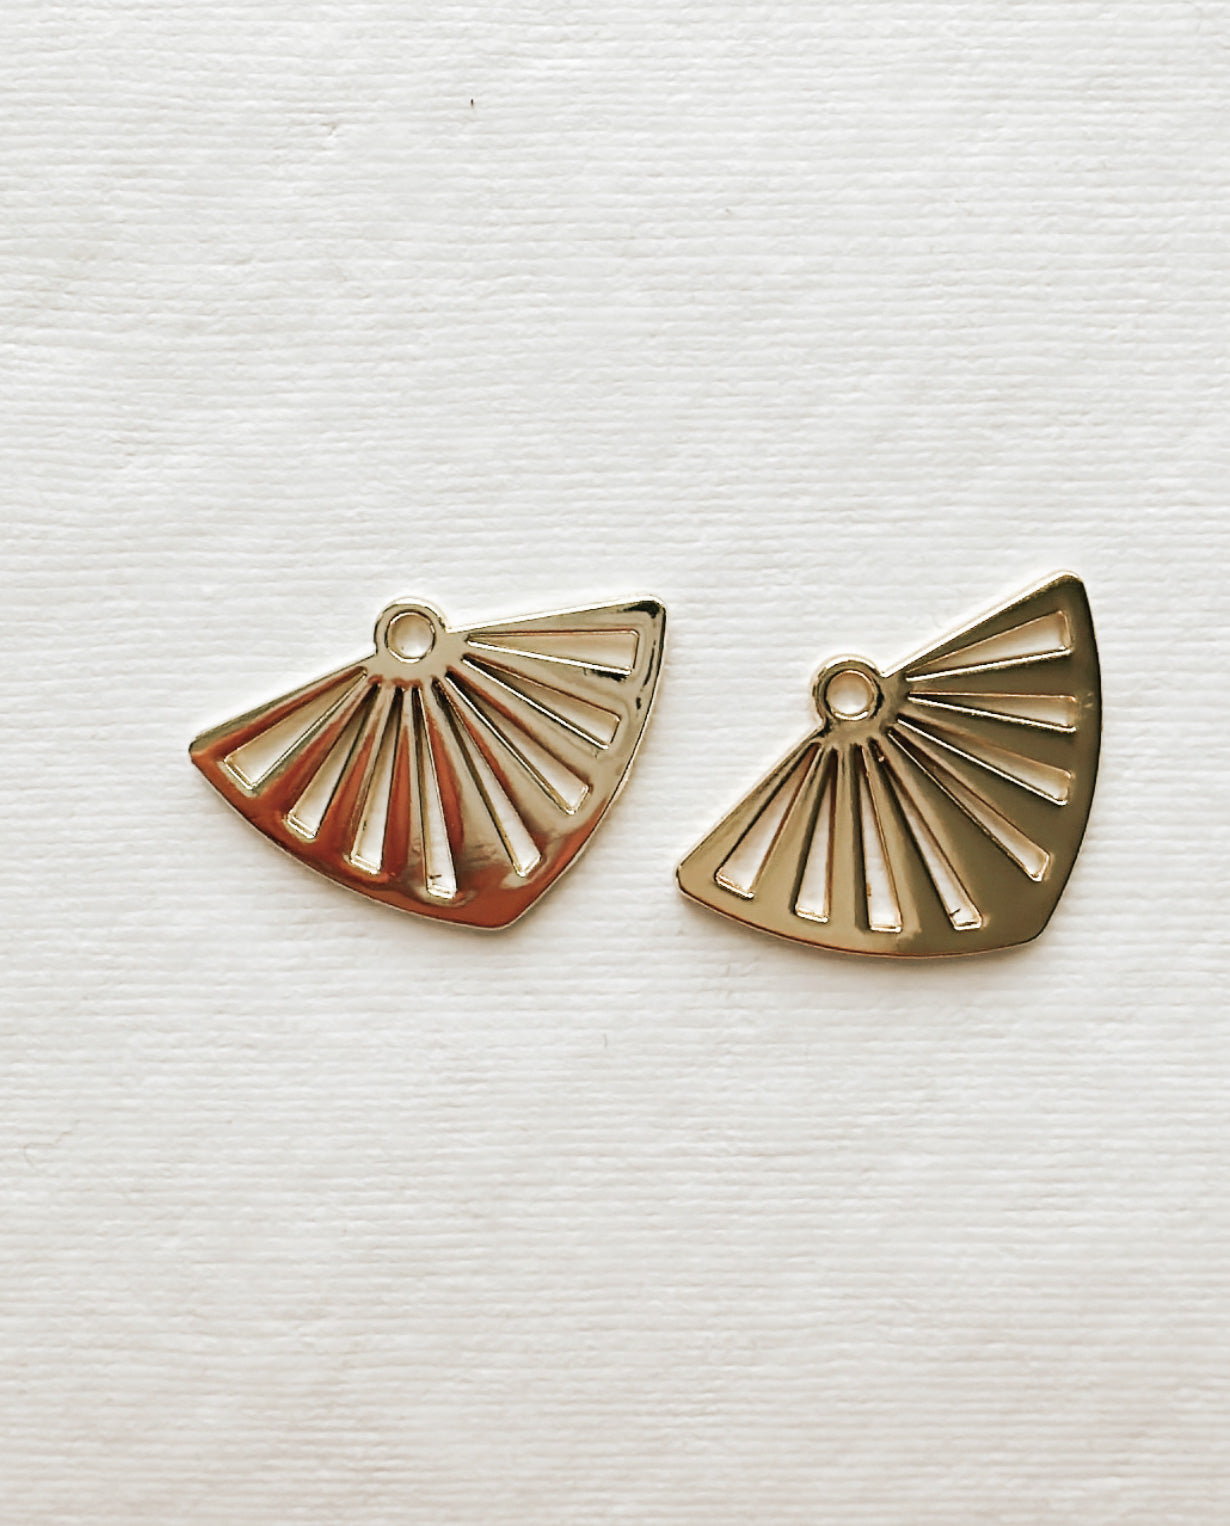 Alloy Gold Fan Charms (Set of 2)